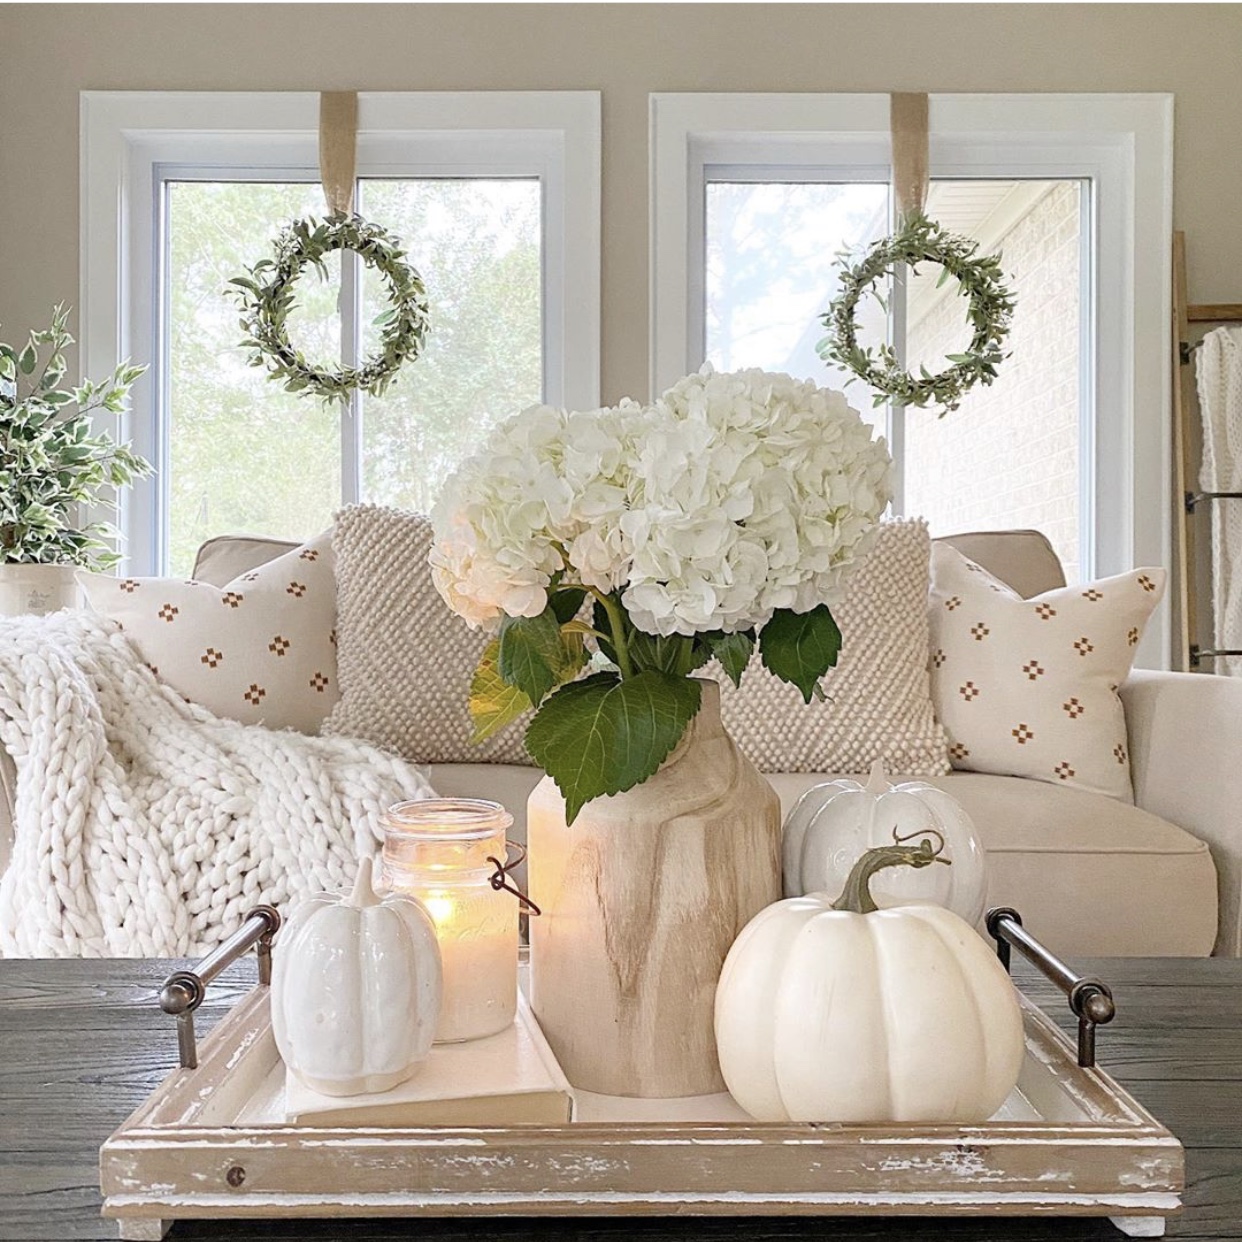 Tray styled on coffee table with wood vase, Fall faux stems, ceramic white pumpkins and a candle.